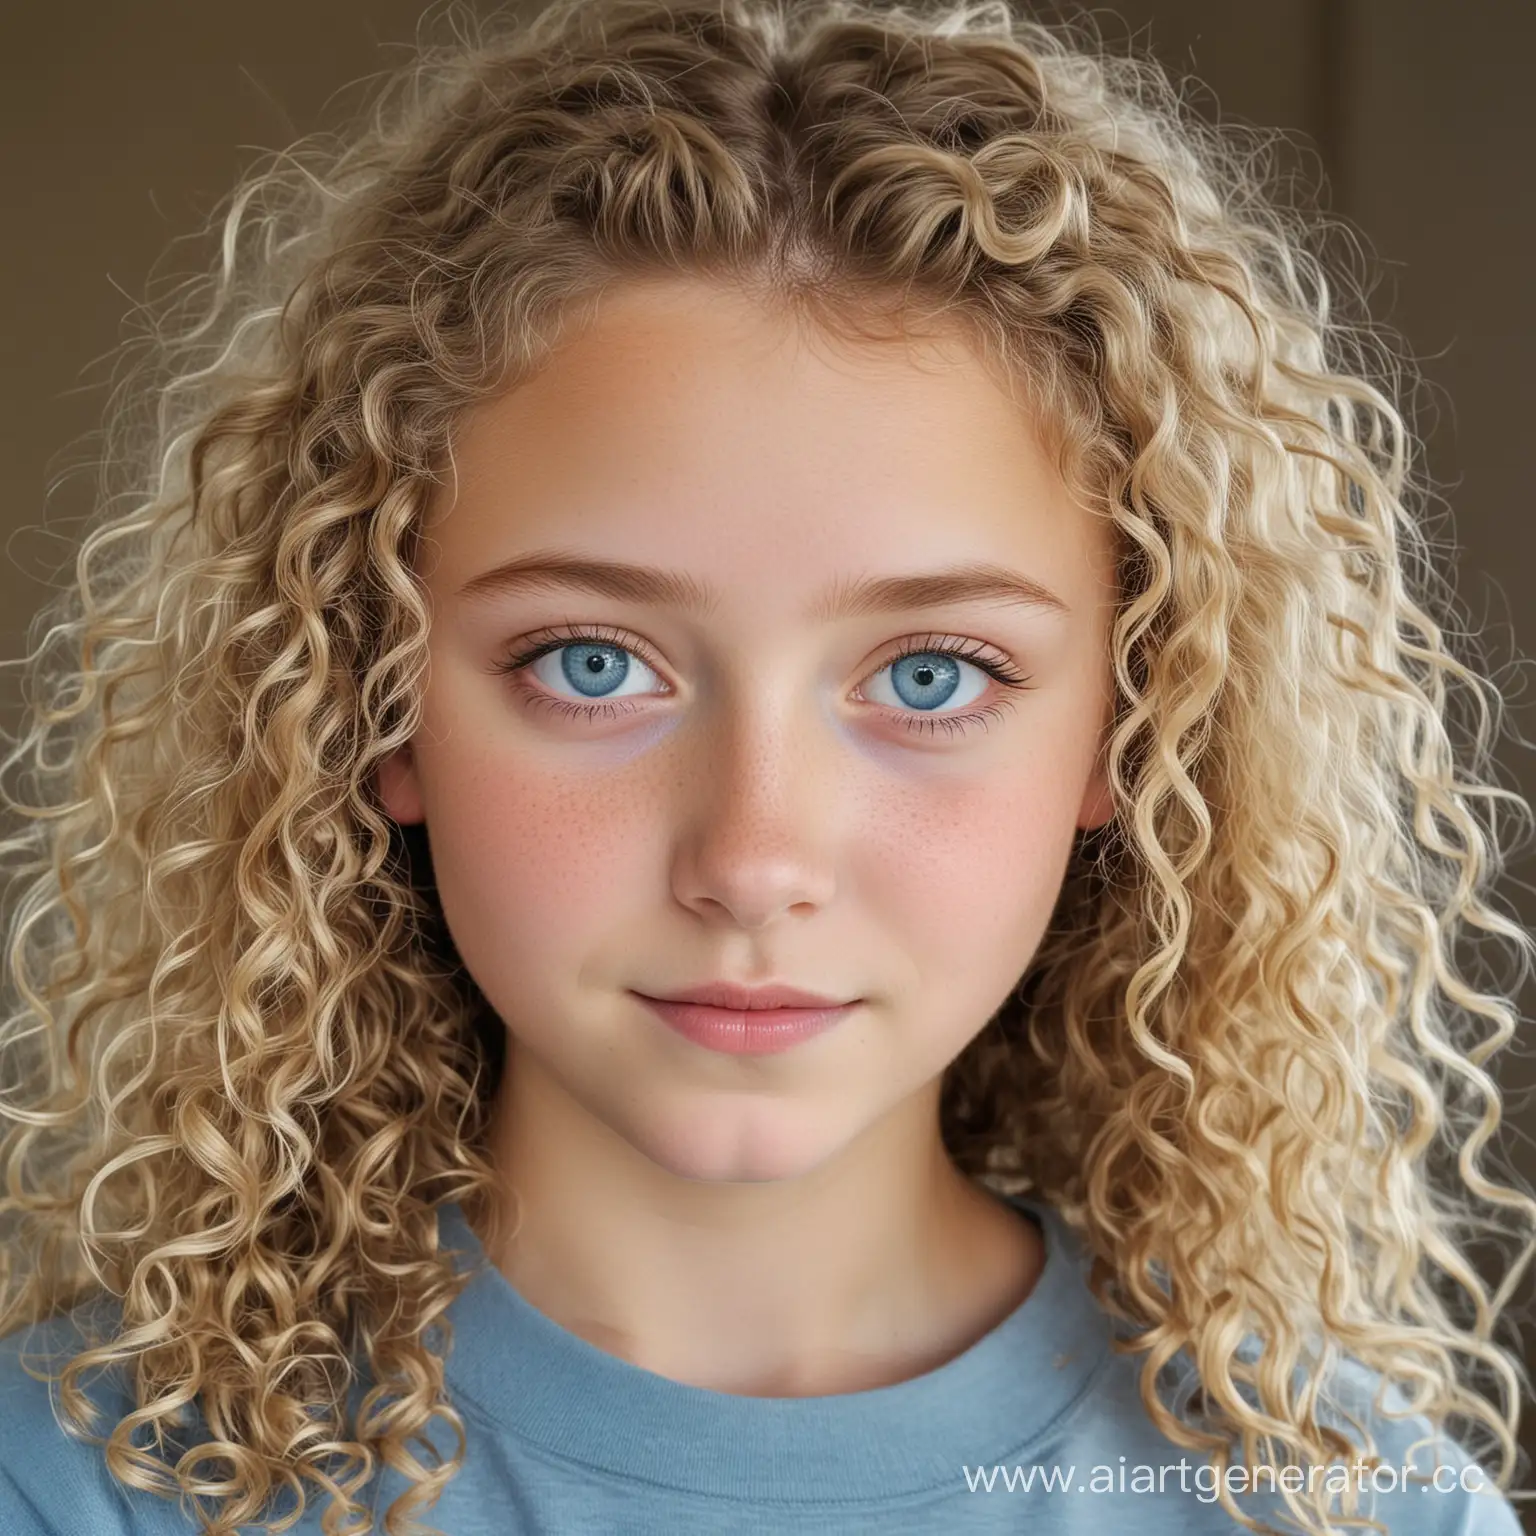 Portrait-of-a-13YearOld-Girl-with-Light-Curly-Hair-and-Blue-Eyes